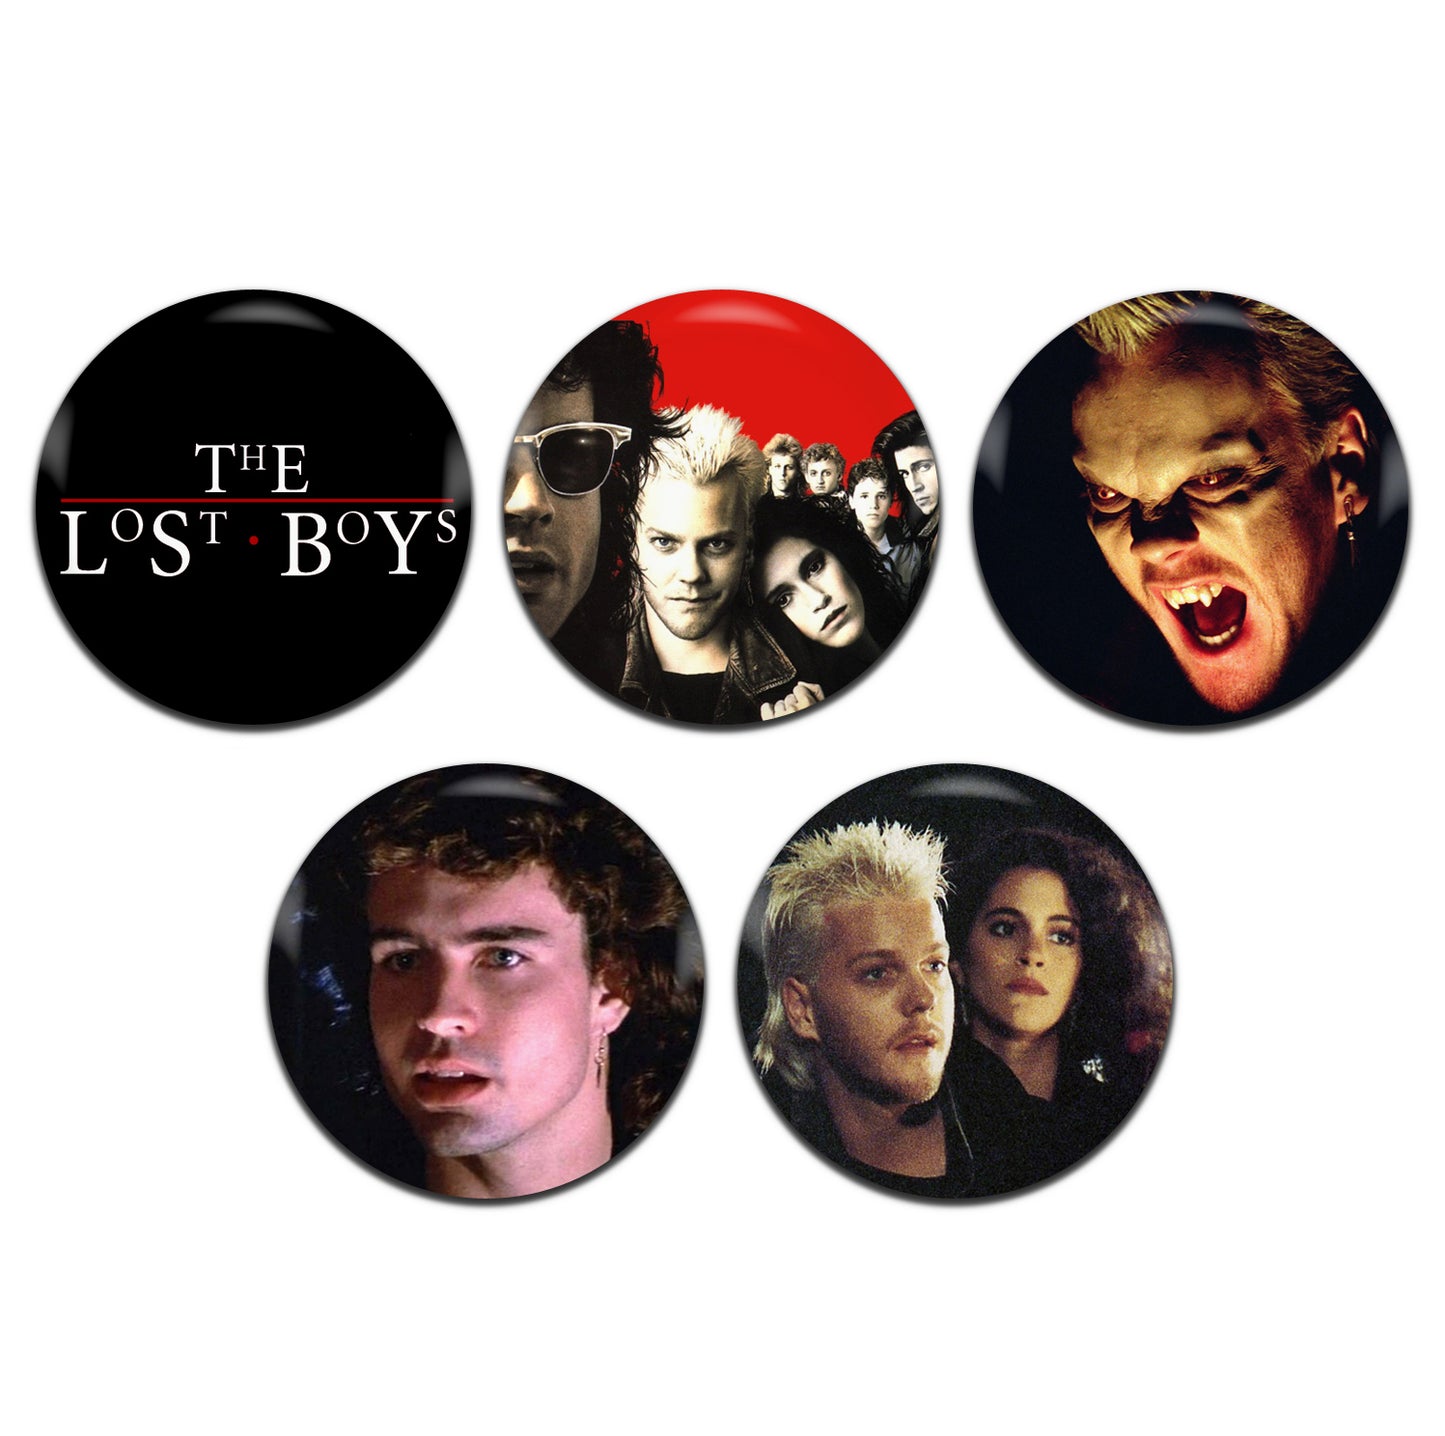 The Lost Boys Movie Horror Vampire Film 80's 25mm / 1 Inch D-Pin Button Badges (5x Set)